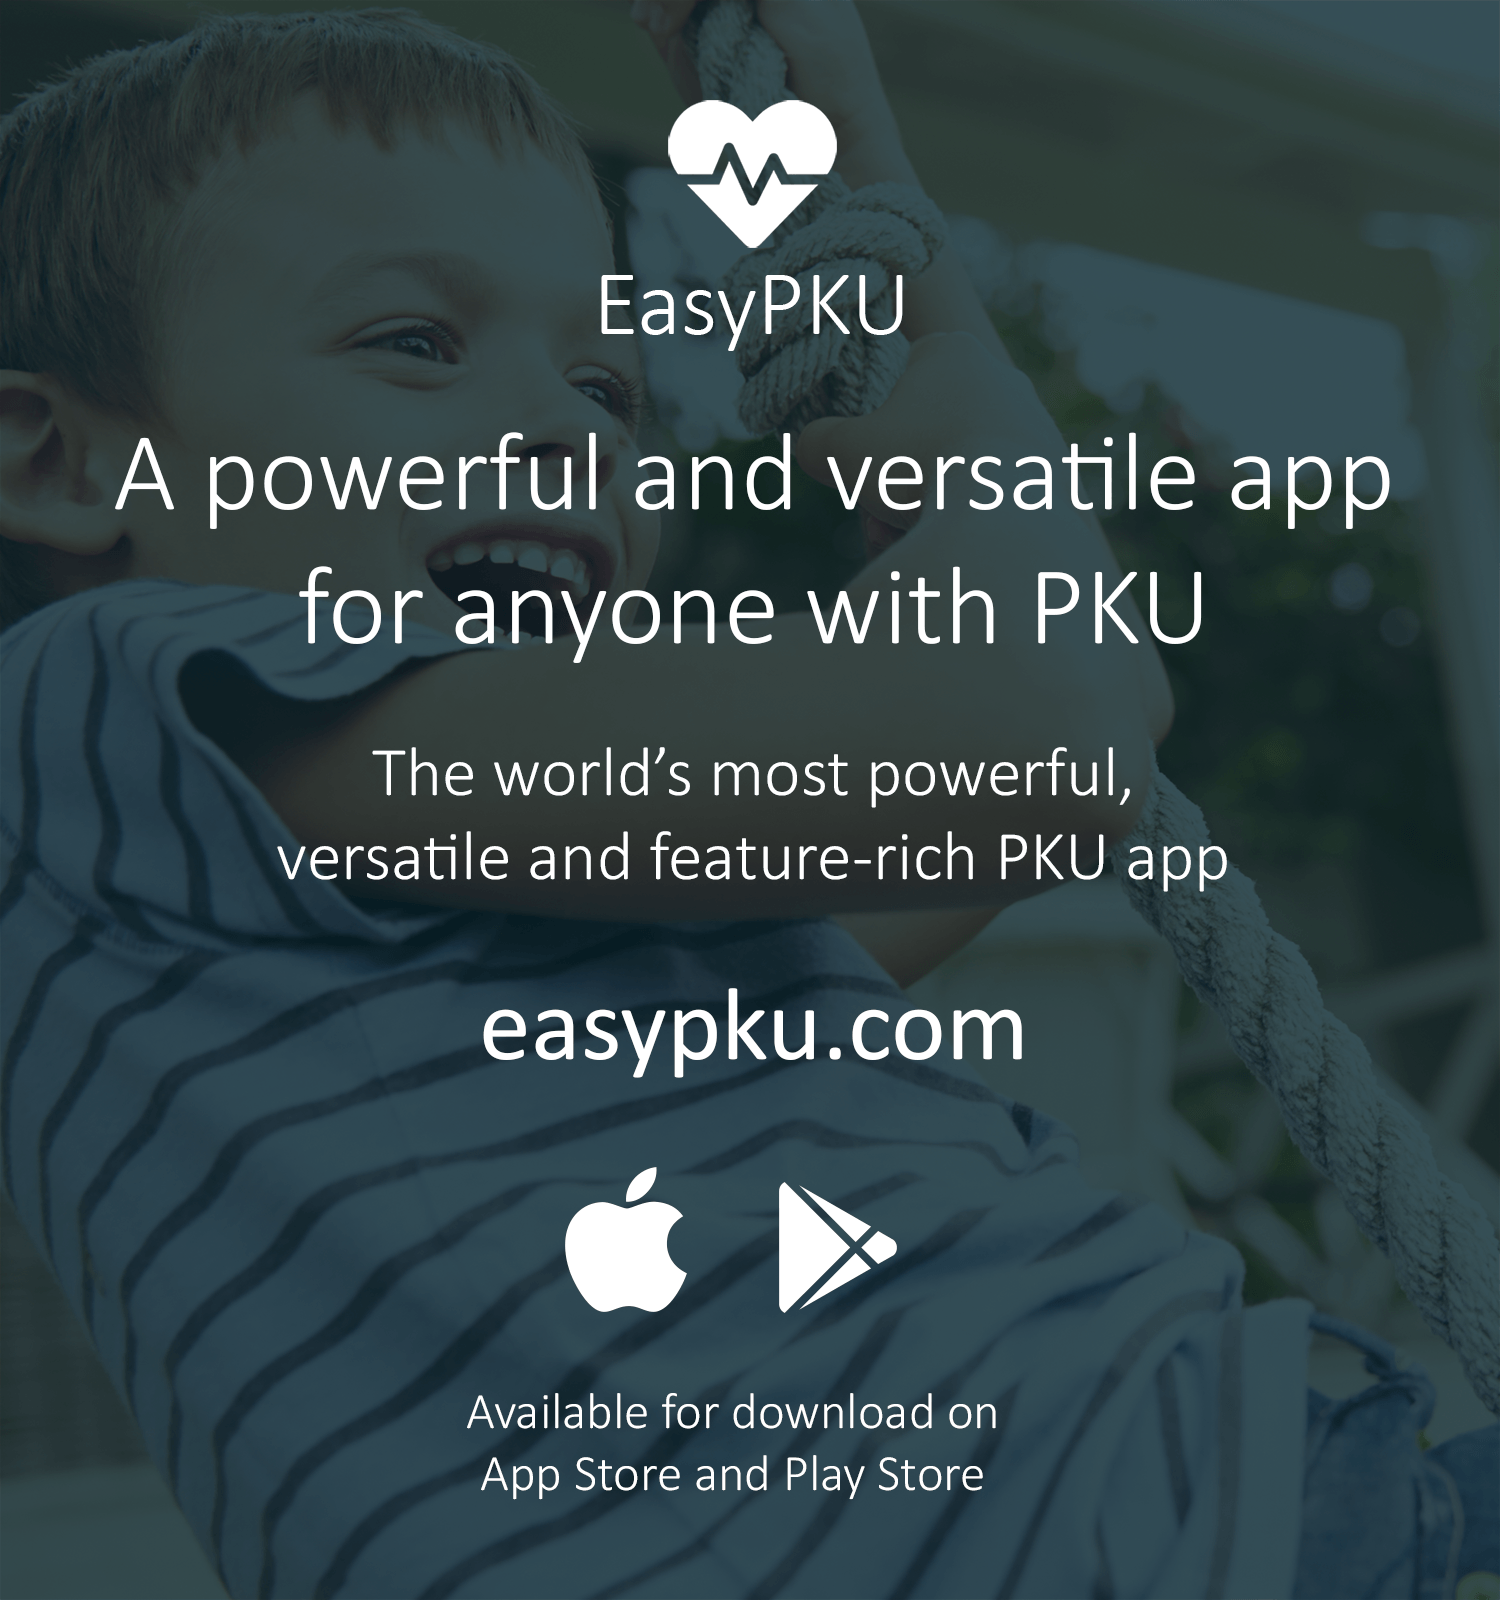 EasyPKU - The world’s most powerful, versatile and feature-rich PKU app